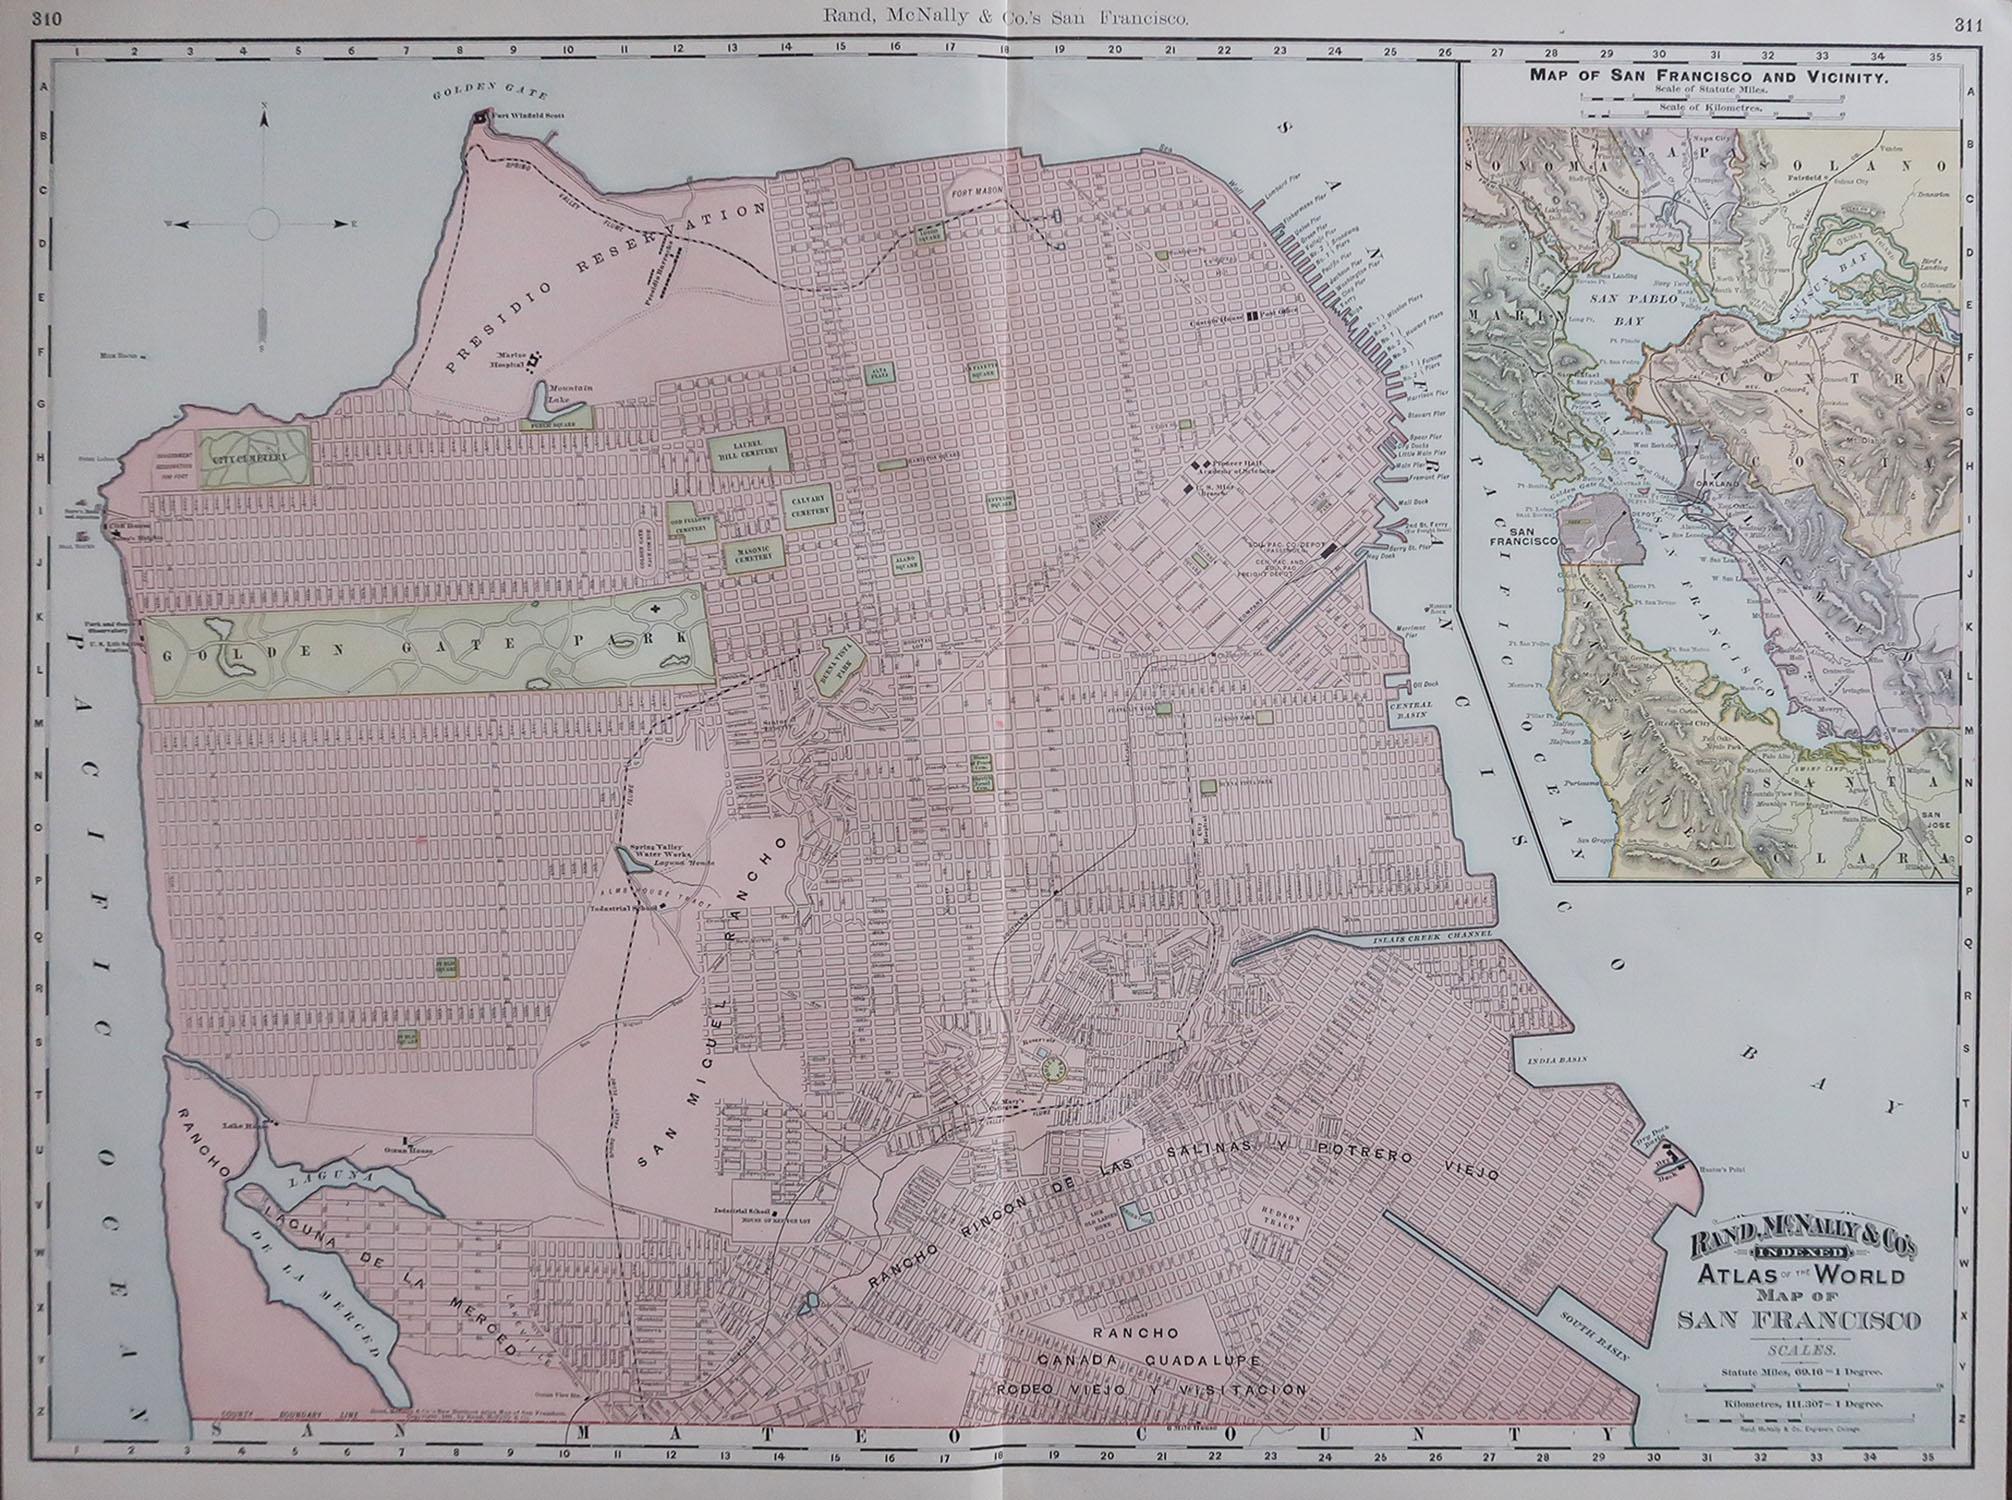 Fabulous colorful map of San Francisco

Original color

By Rand, McNally & Co.

Published, 1894

Unframed

Free shipping.